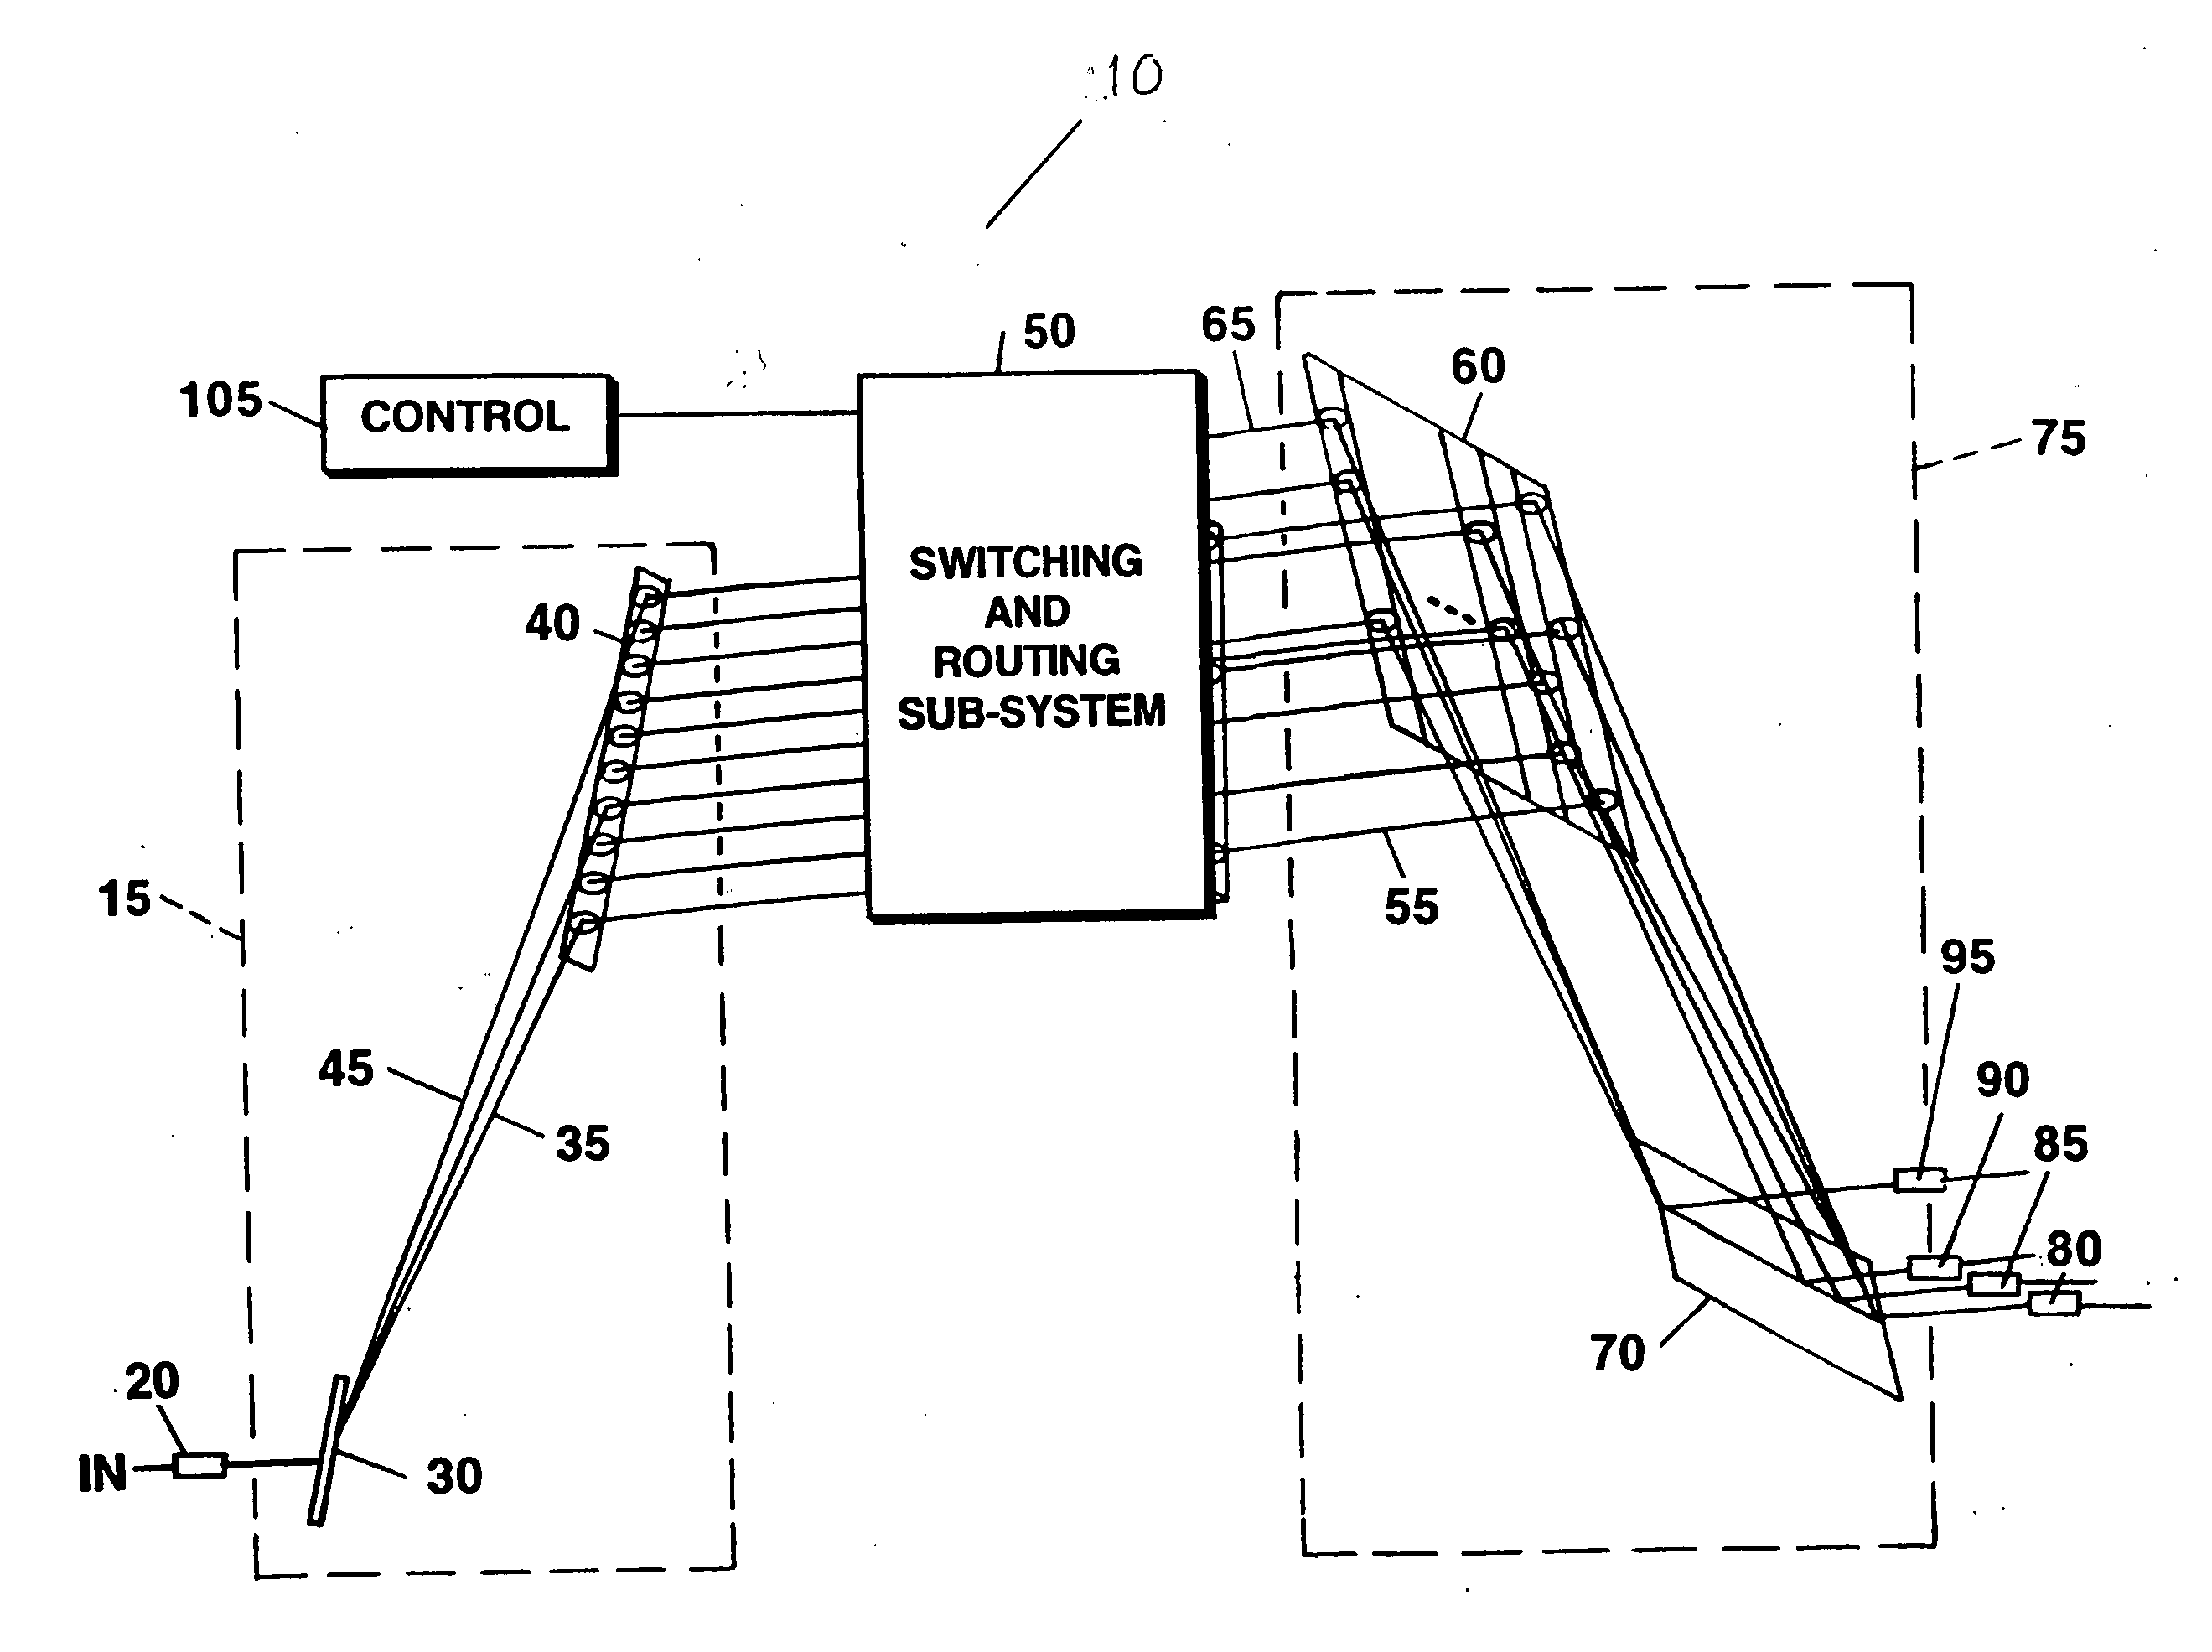 Wavelength selective switching and/or routing system